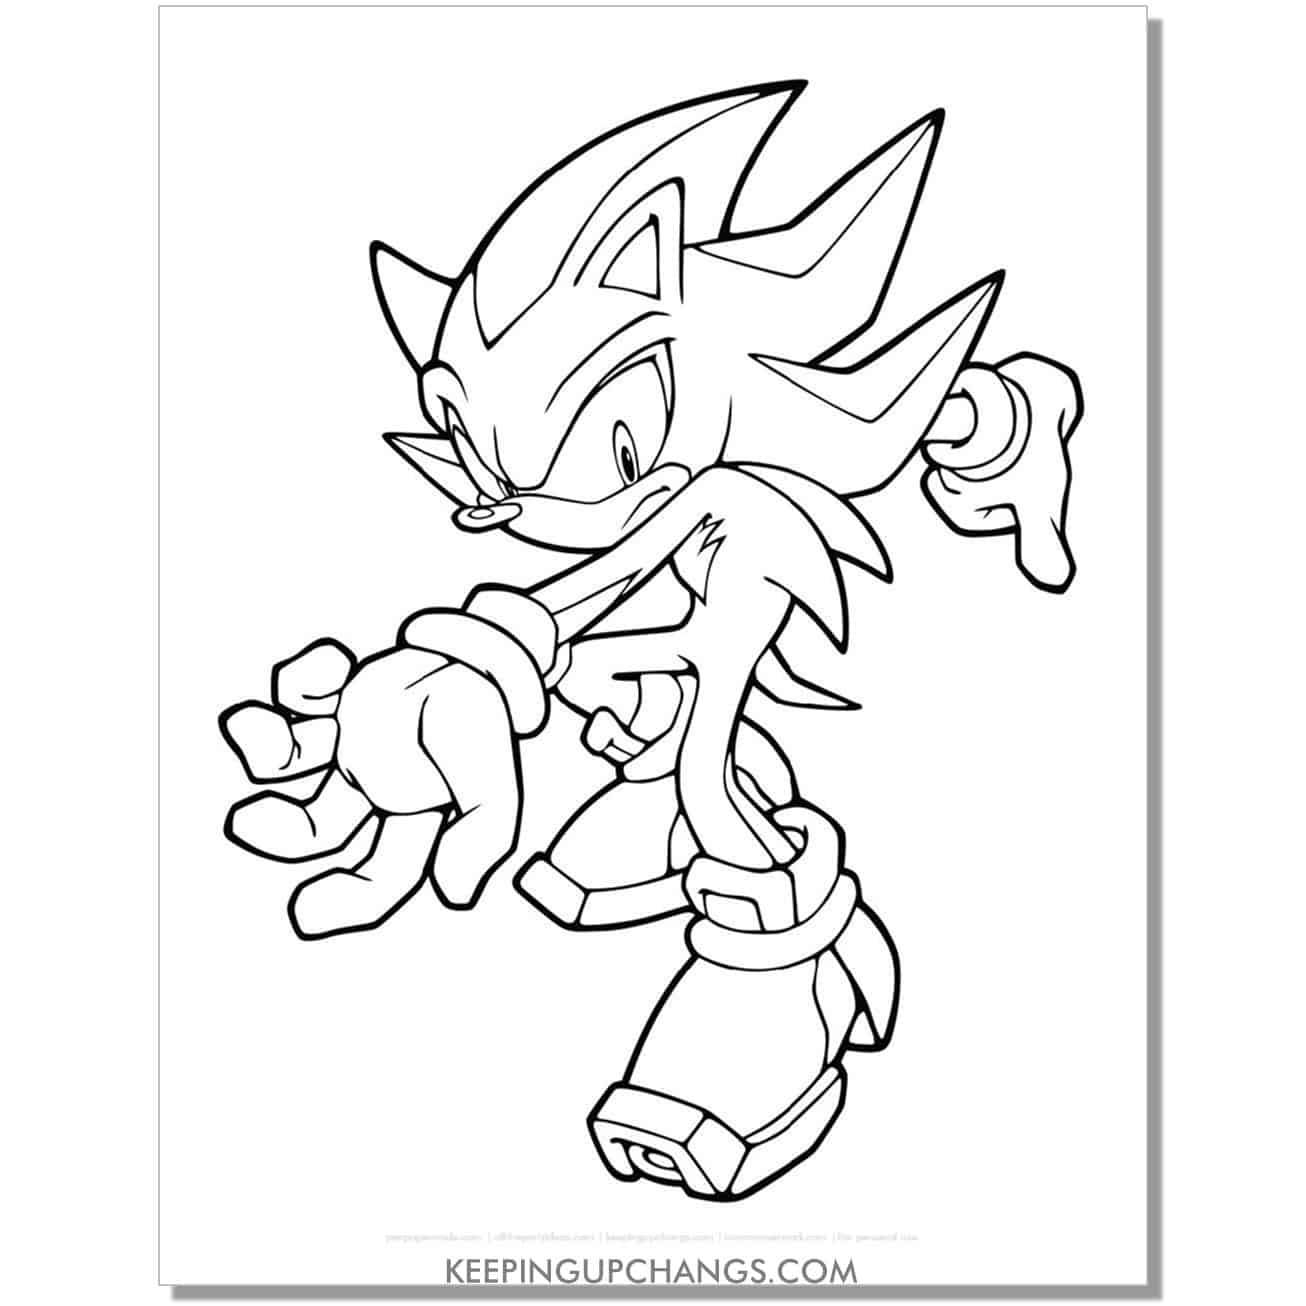 shadow sonic with palm open upwards coloring page.